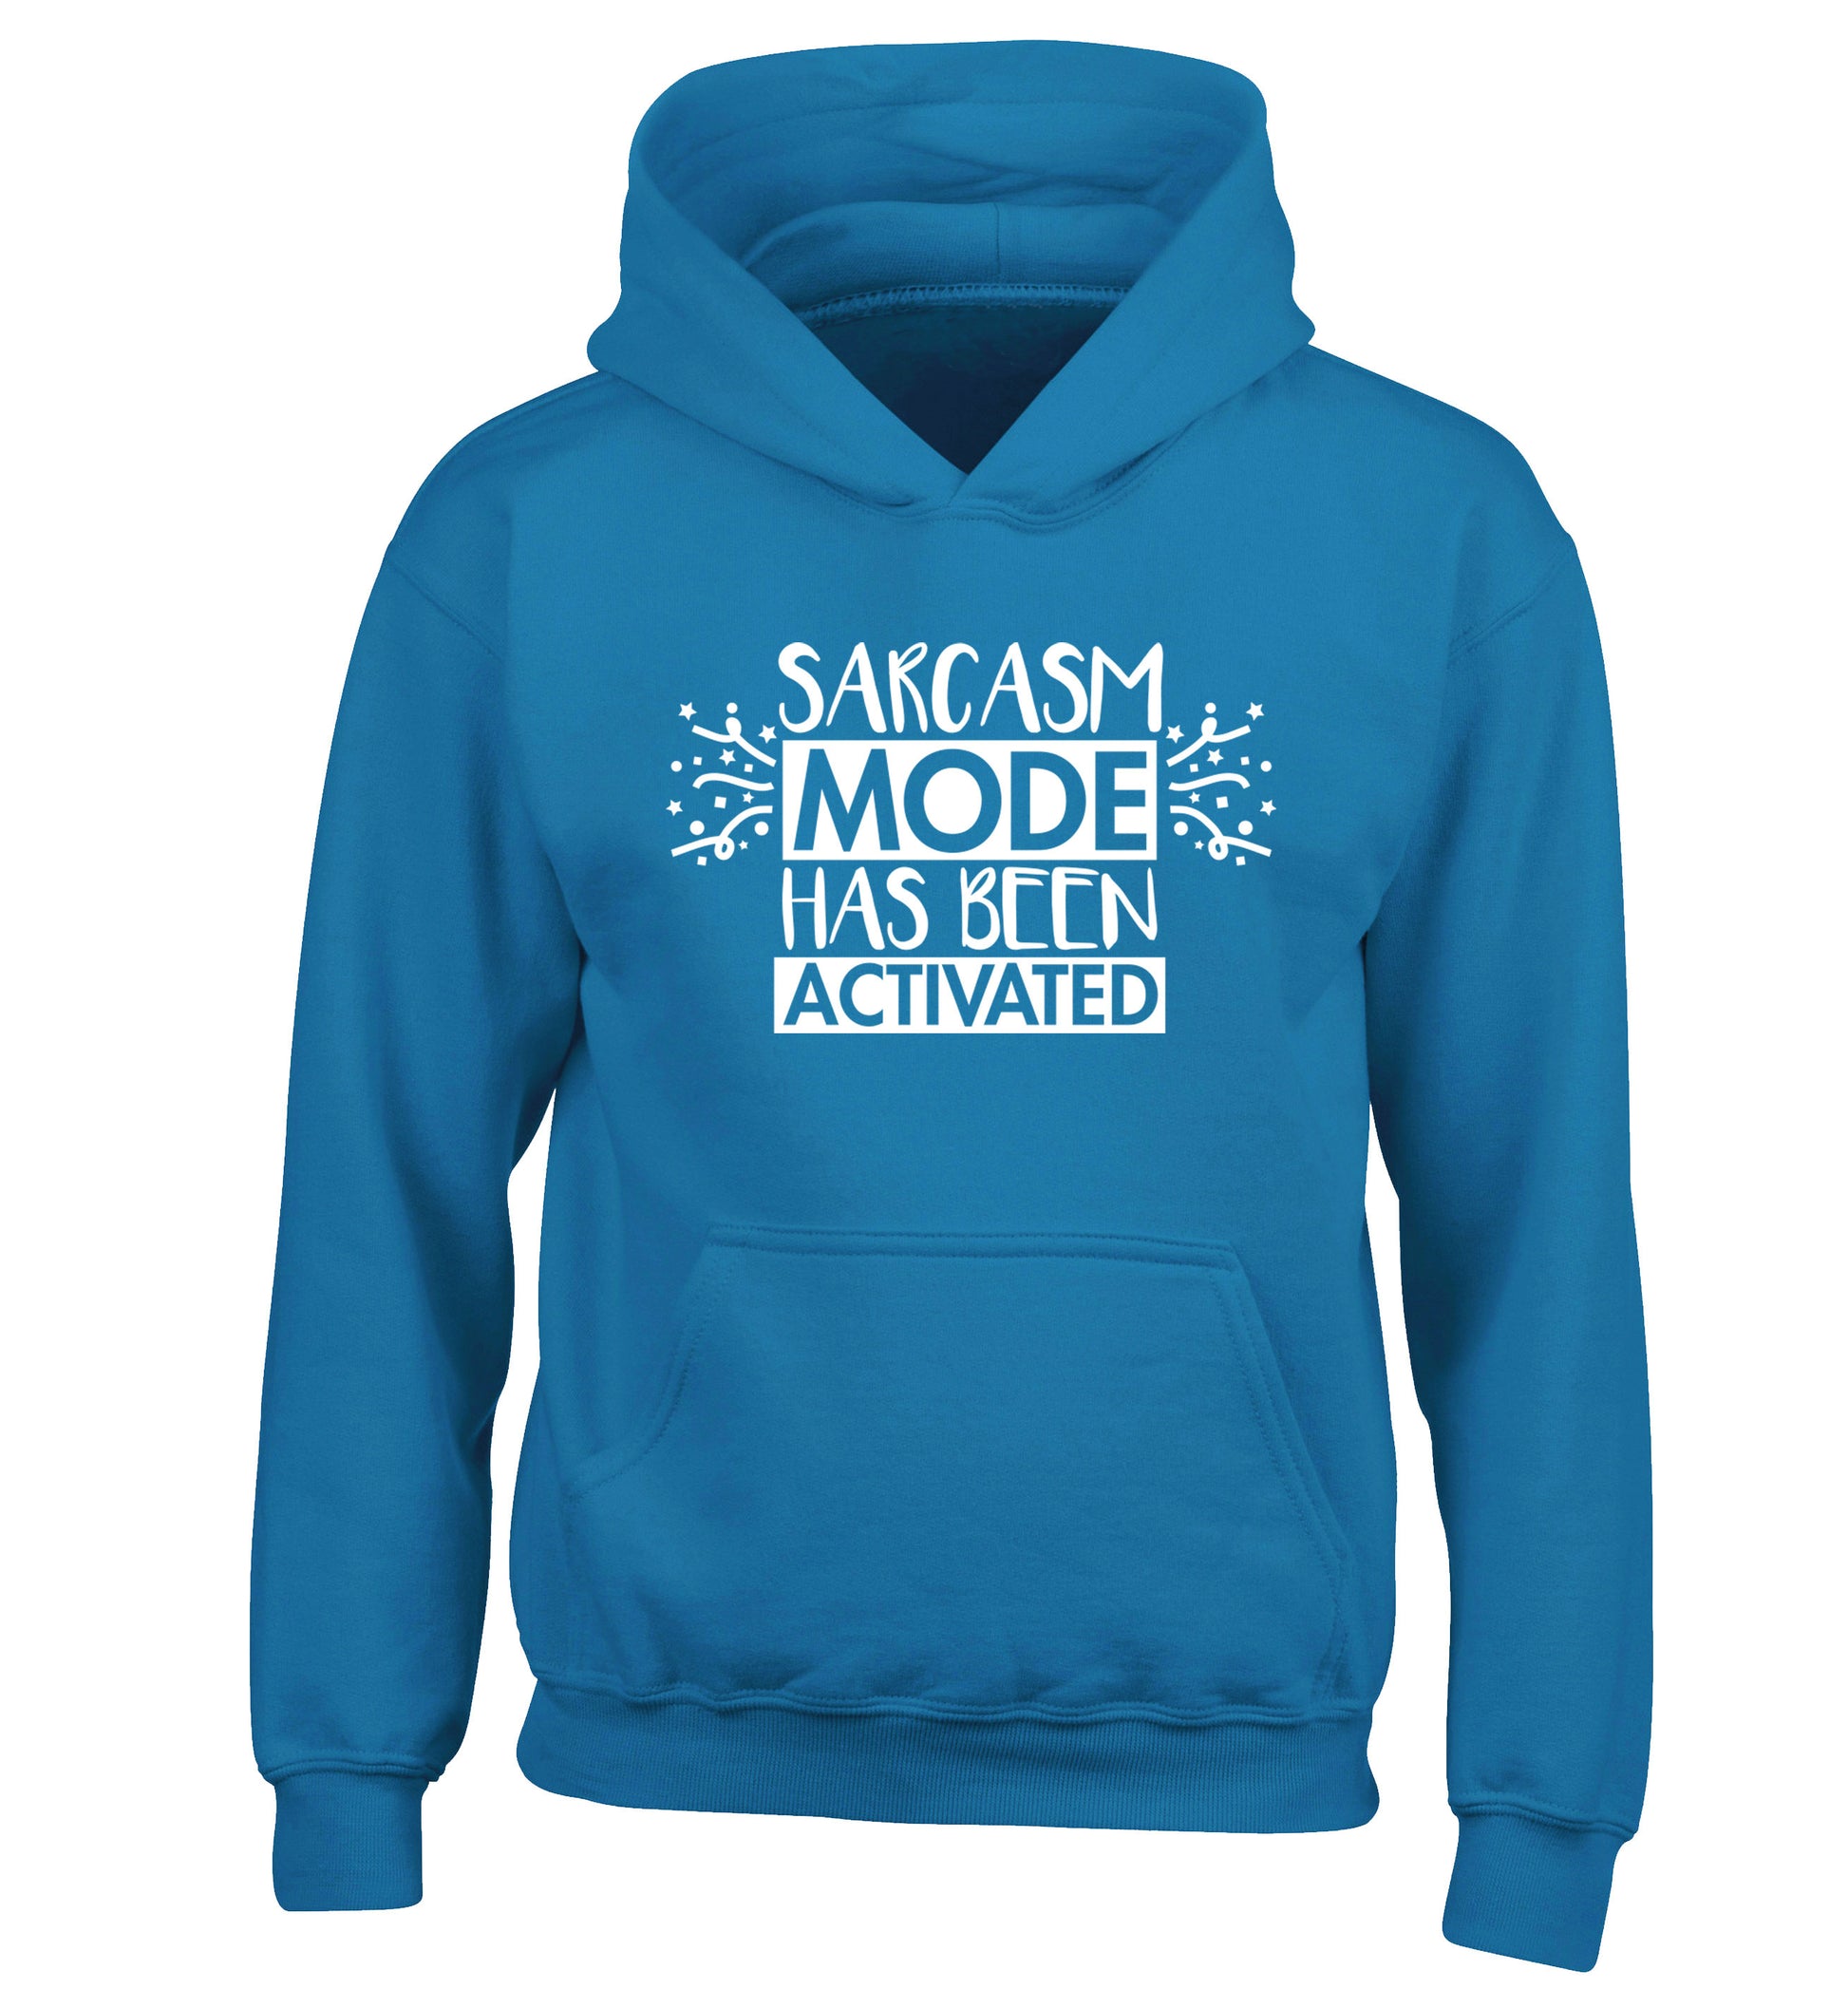 Sarcarsm mode has been activated children's blue hoodie 12-14 Years